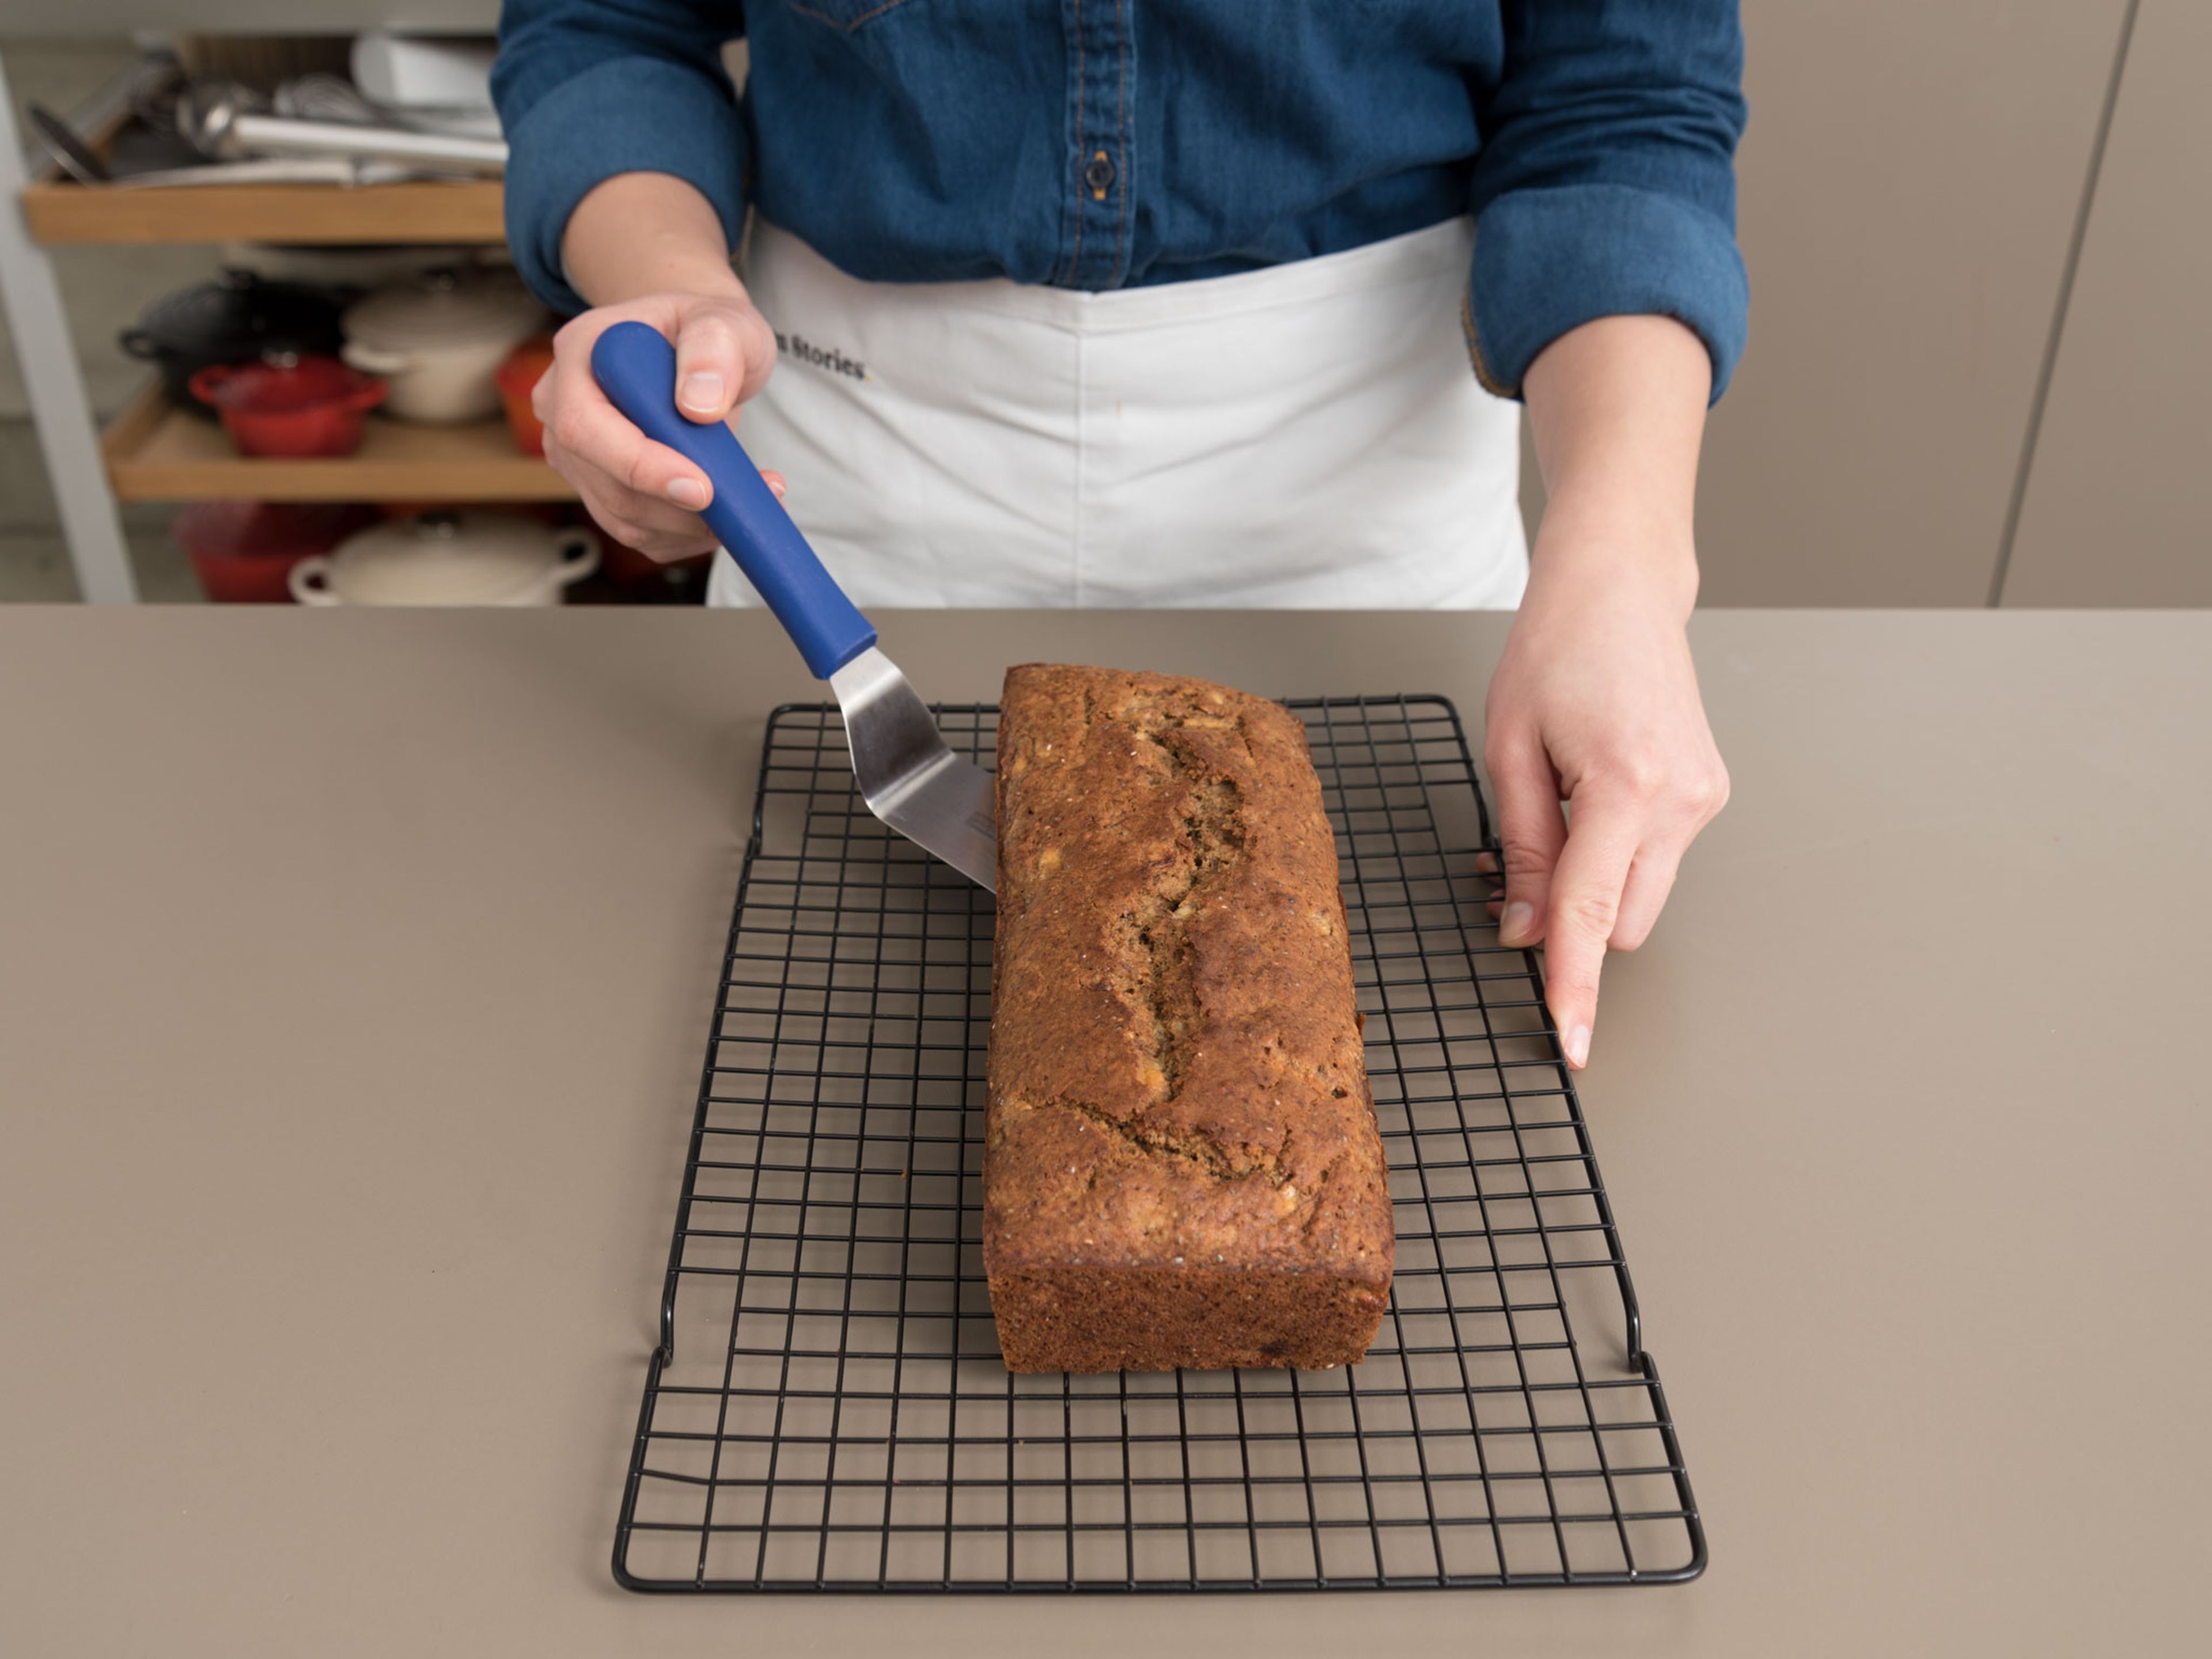 Bake at 175°C/350°F for approx. 55 – 65 min., or until a toothpick inserted into the center of the bread comes out clean. Cool in pan for approx. 10 min., then transfer to cooling rack to cool completely. Enjoy!